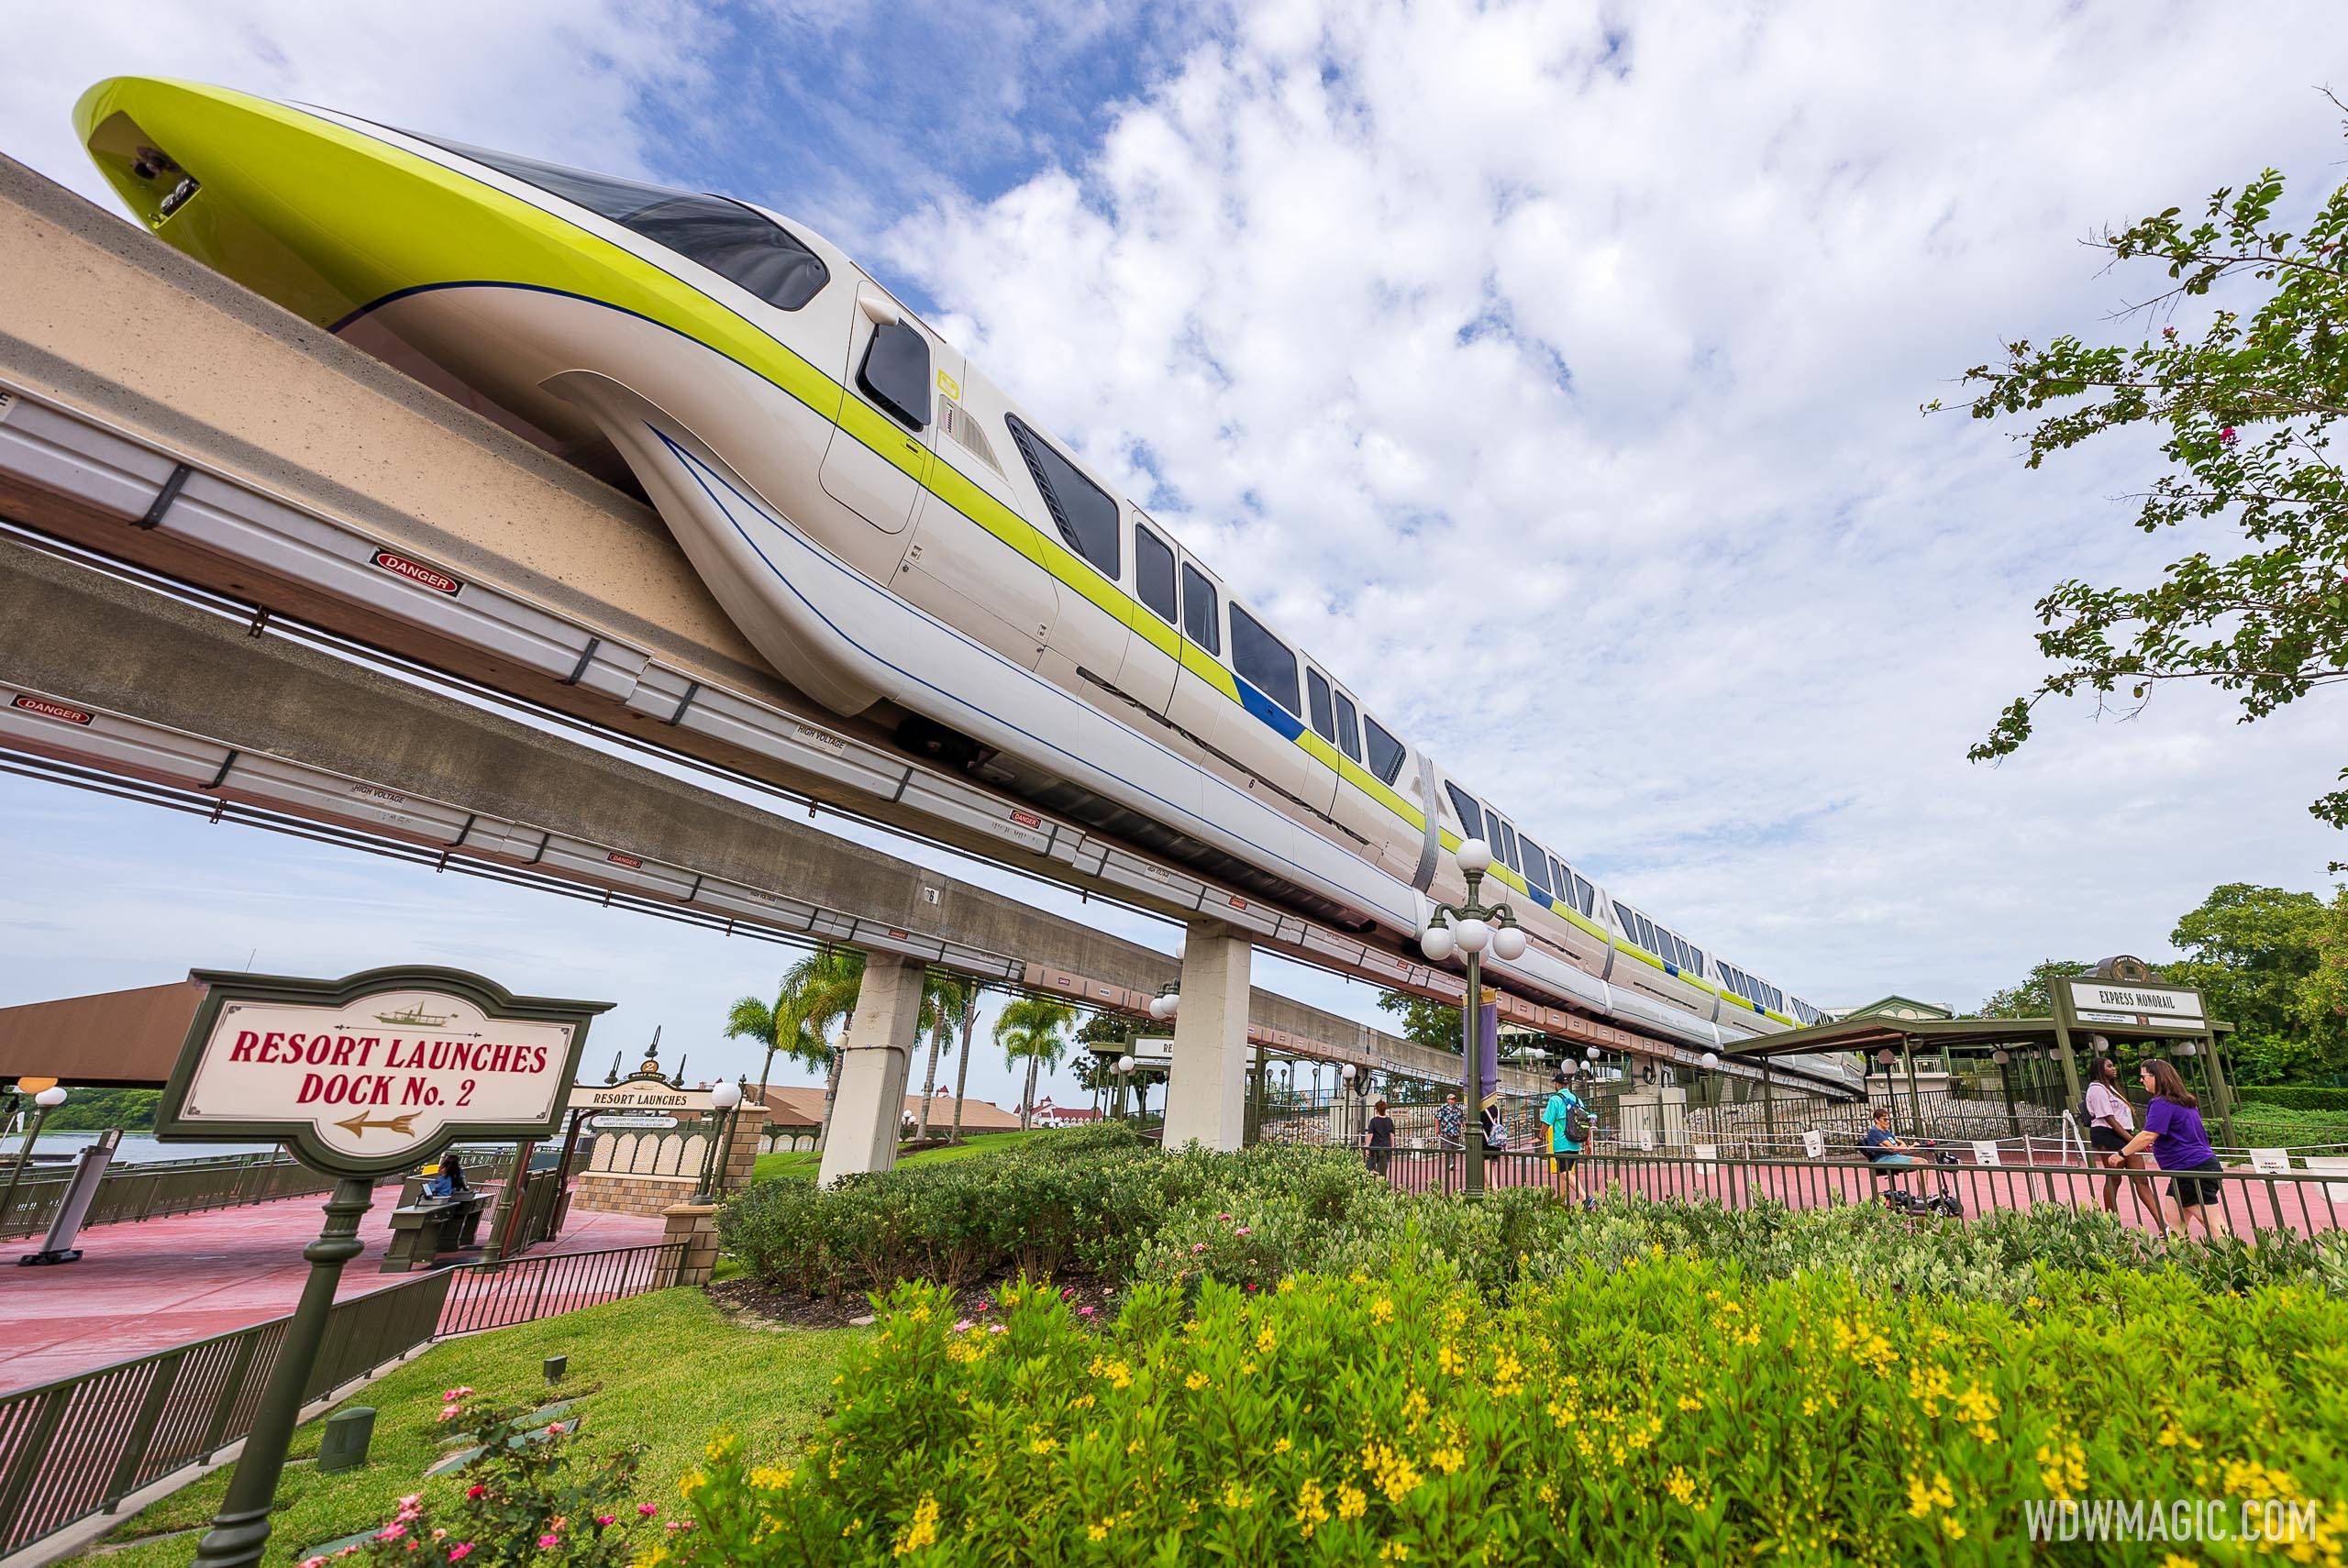 Walt Disney World's monorail will now be subject to state oversight for the first time